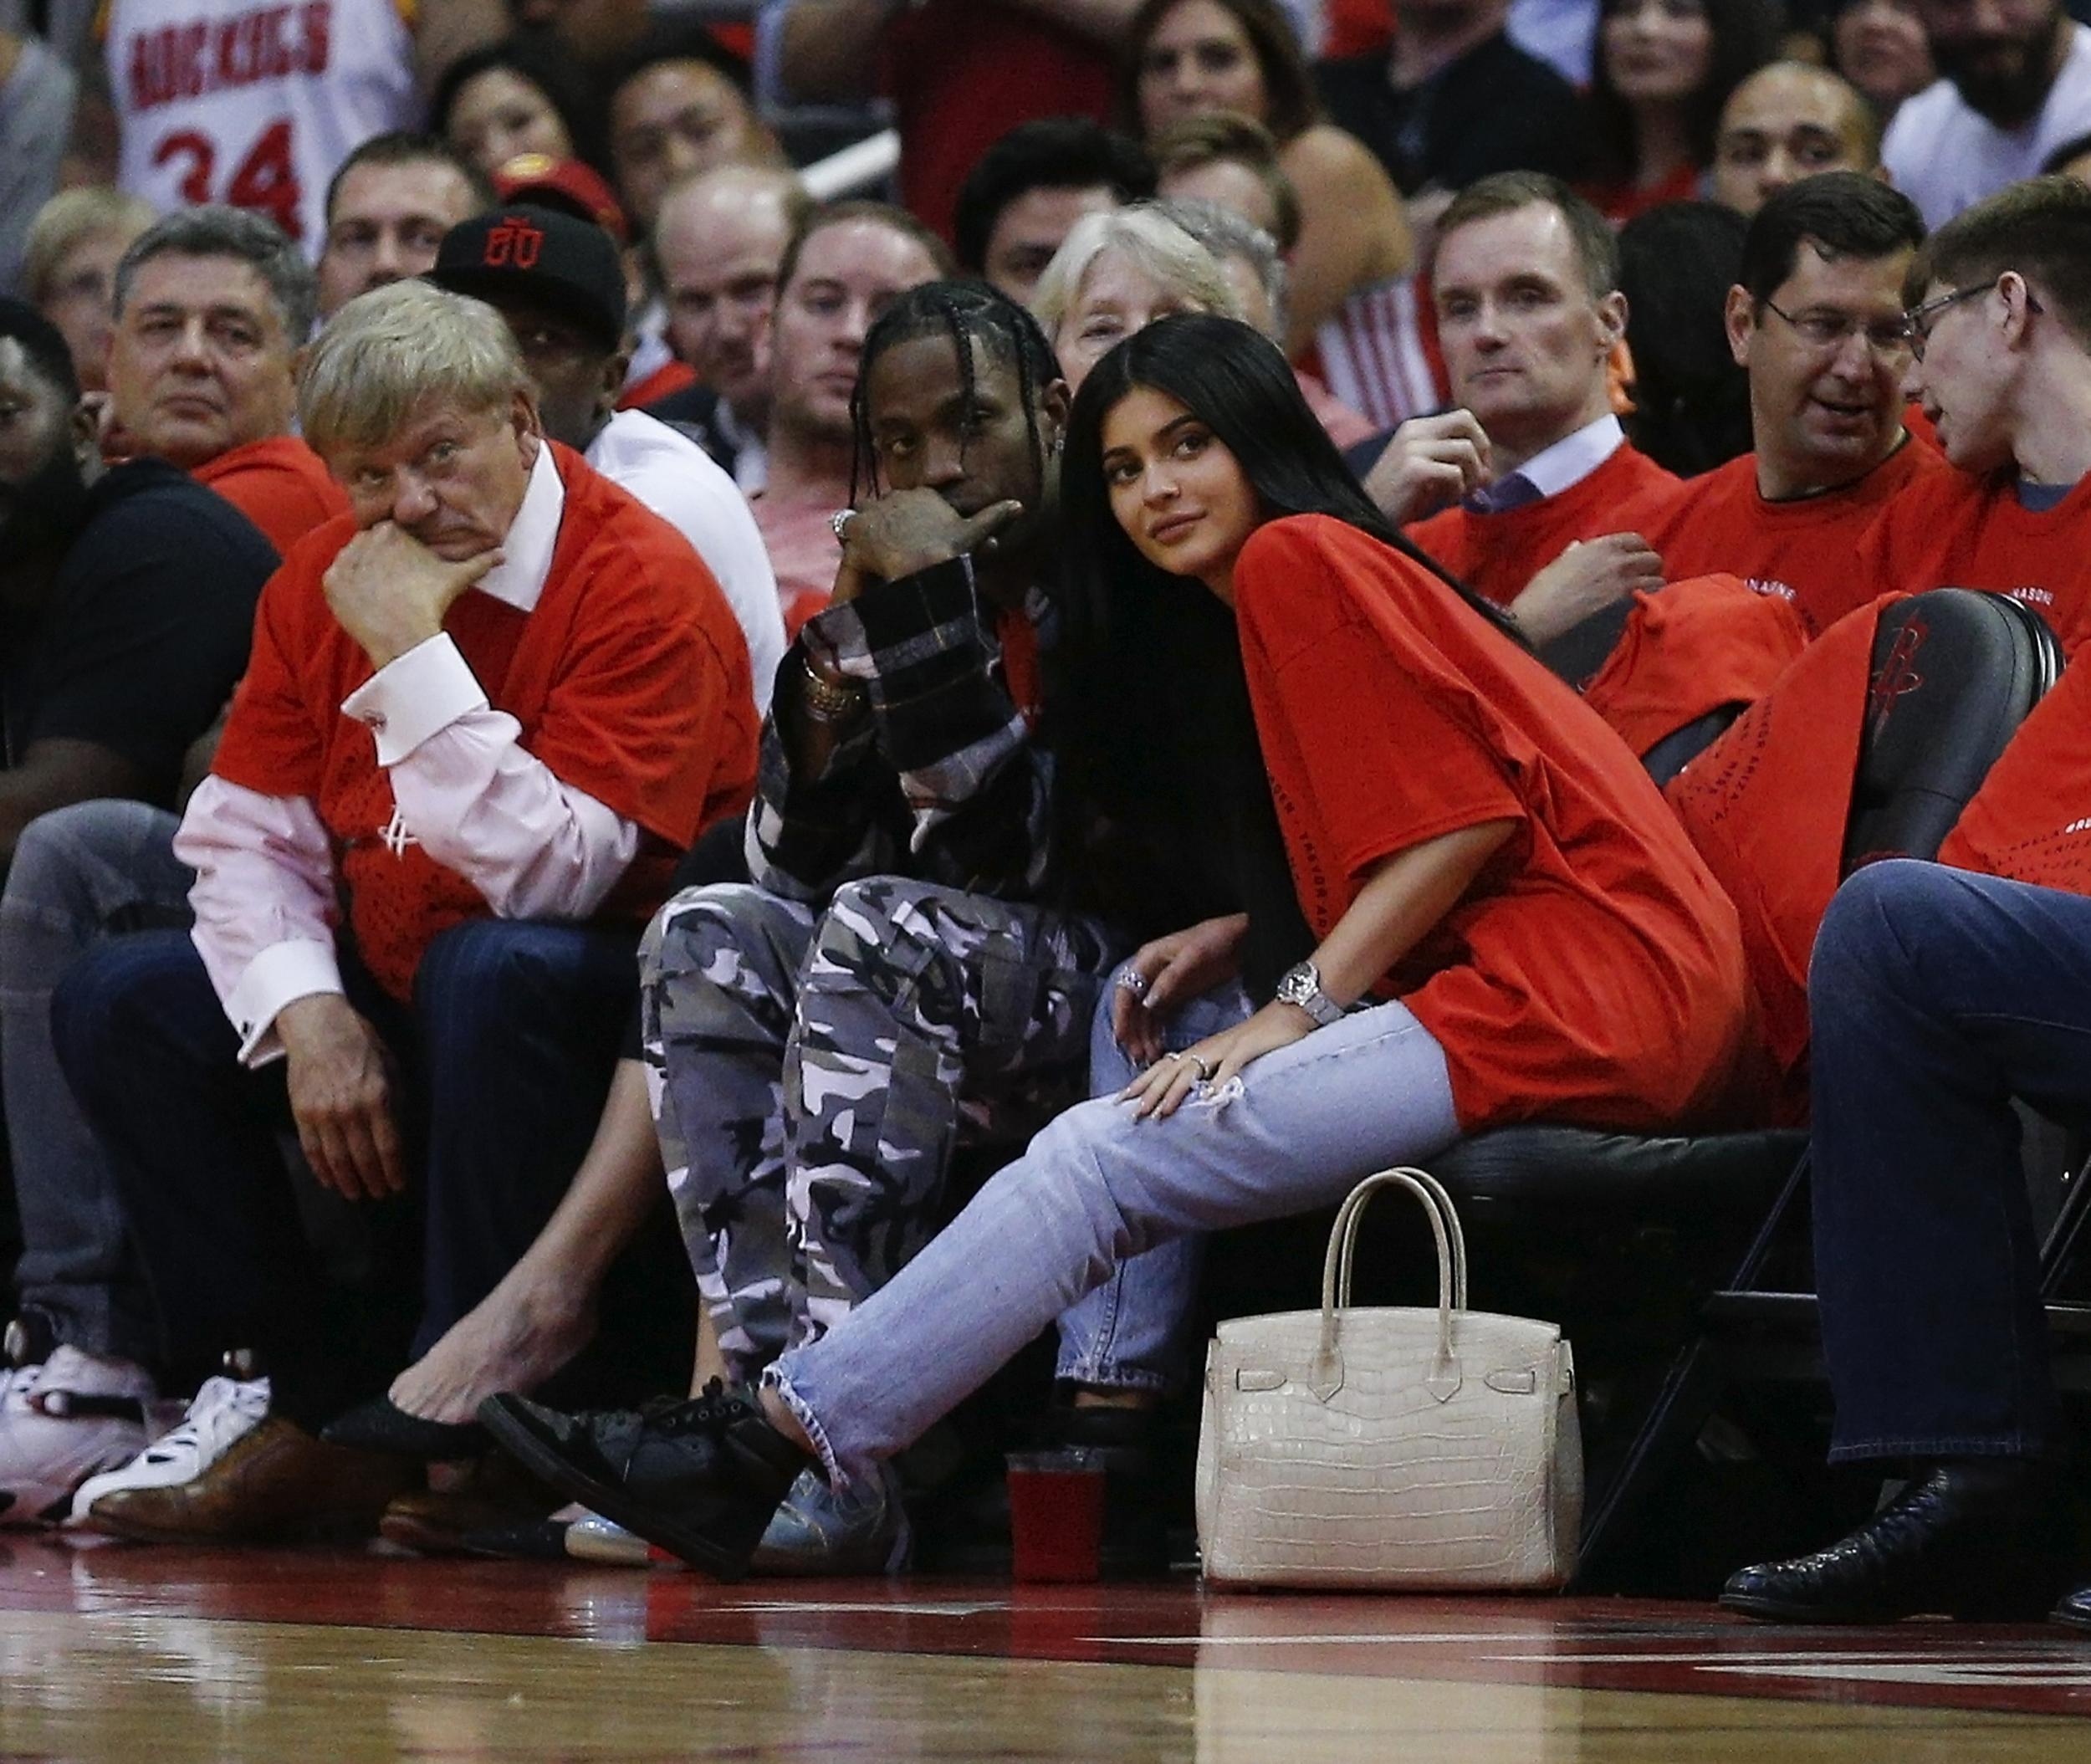 Kylie Jenner with boyfriend Travis Scott, who recently announced they are expecting